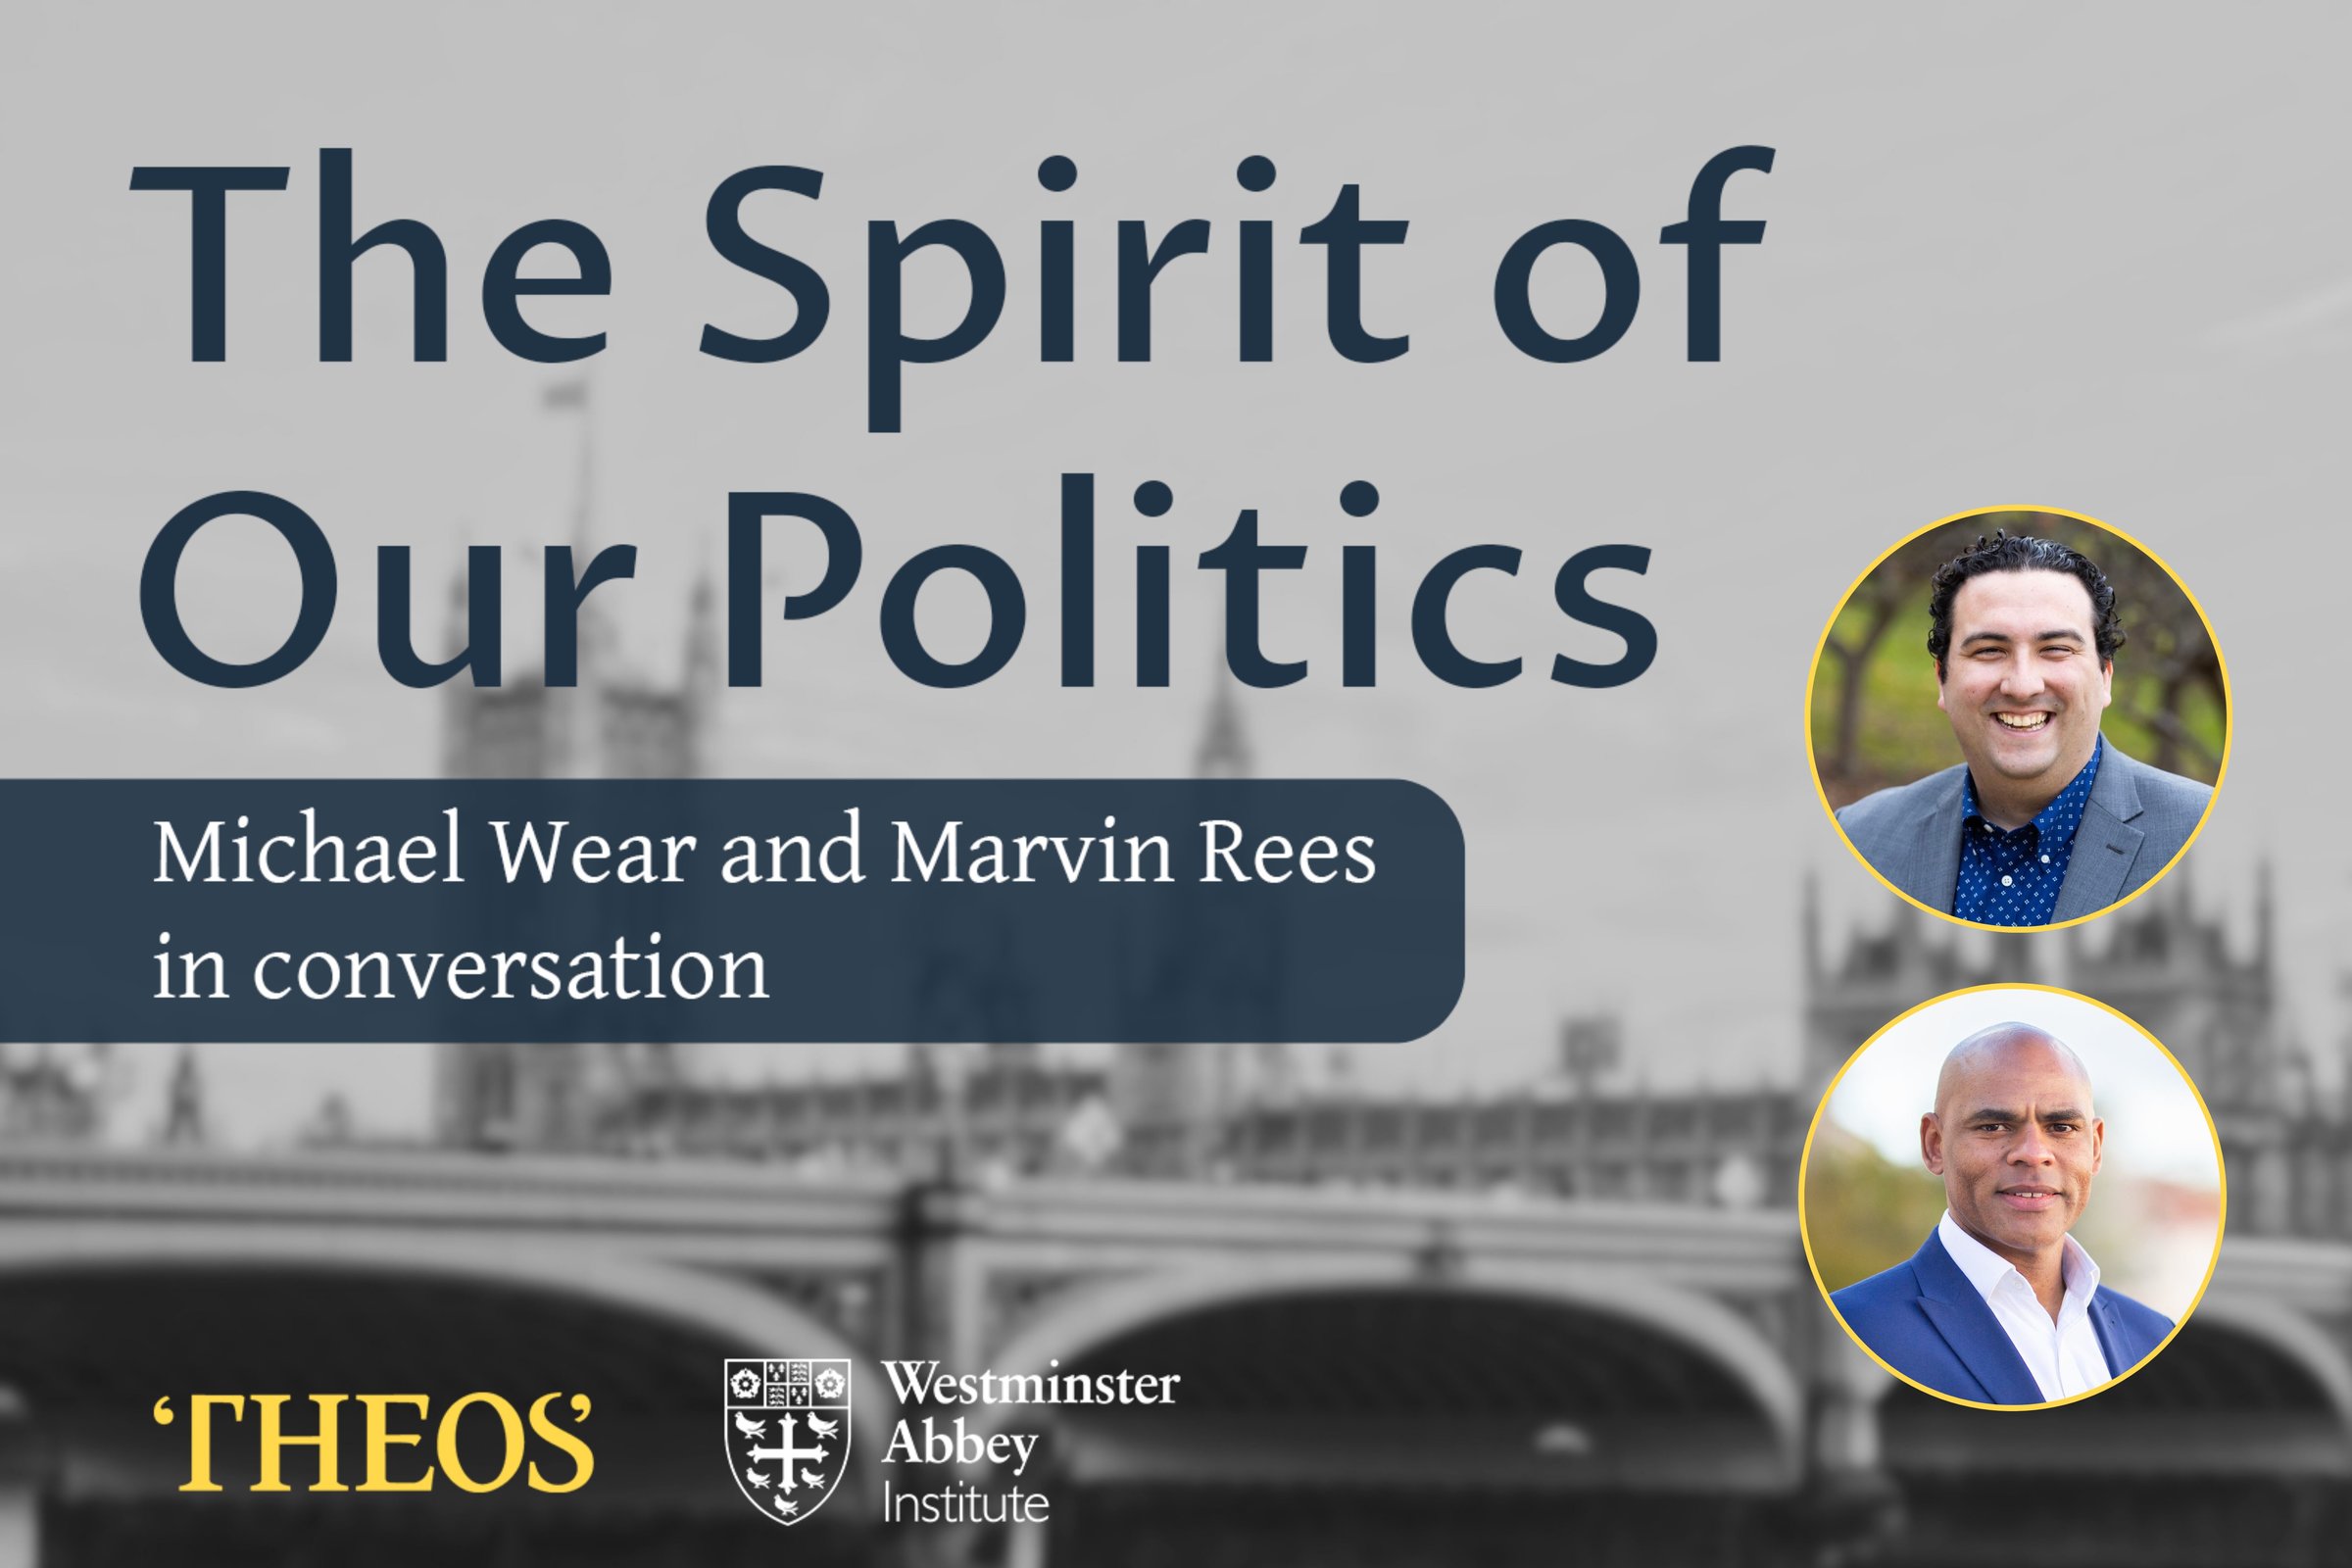 The Spirit of Our Politics: Michael Wear and Marvin Rees in conversation